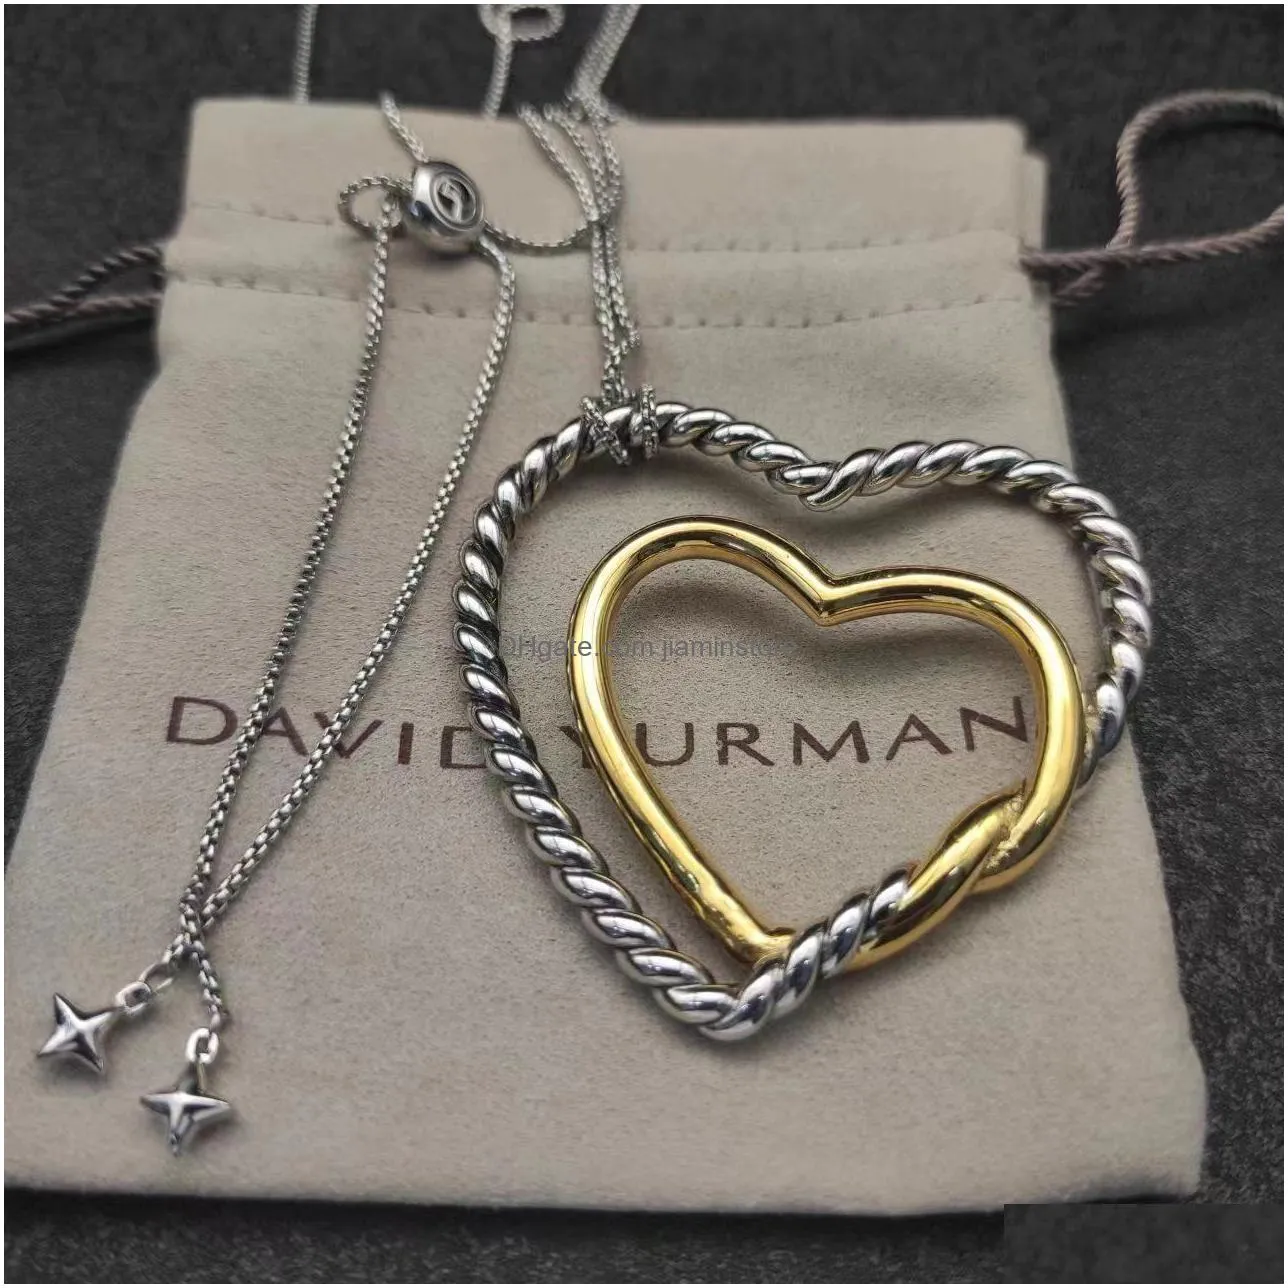 Pendant Necklaces Dy Diamond Heart Pendant Designer Necklace For Women And Men In Europe America Couples Retro Madison Chain Gold Part Dhmeh